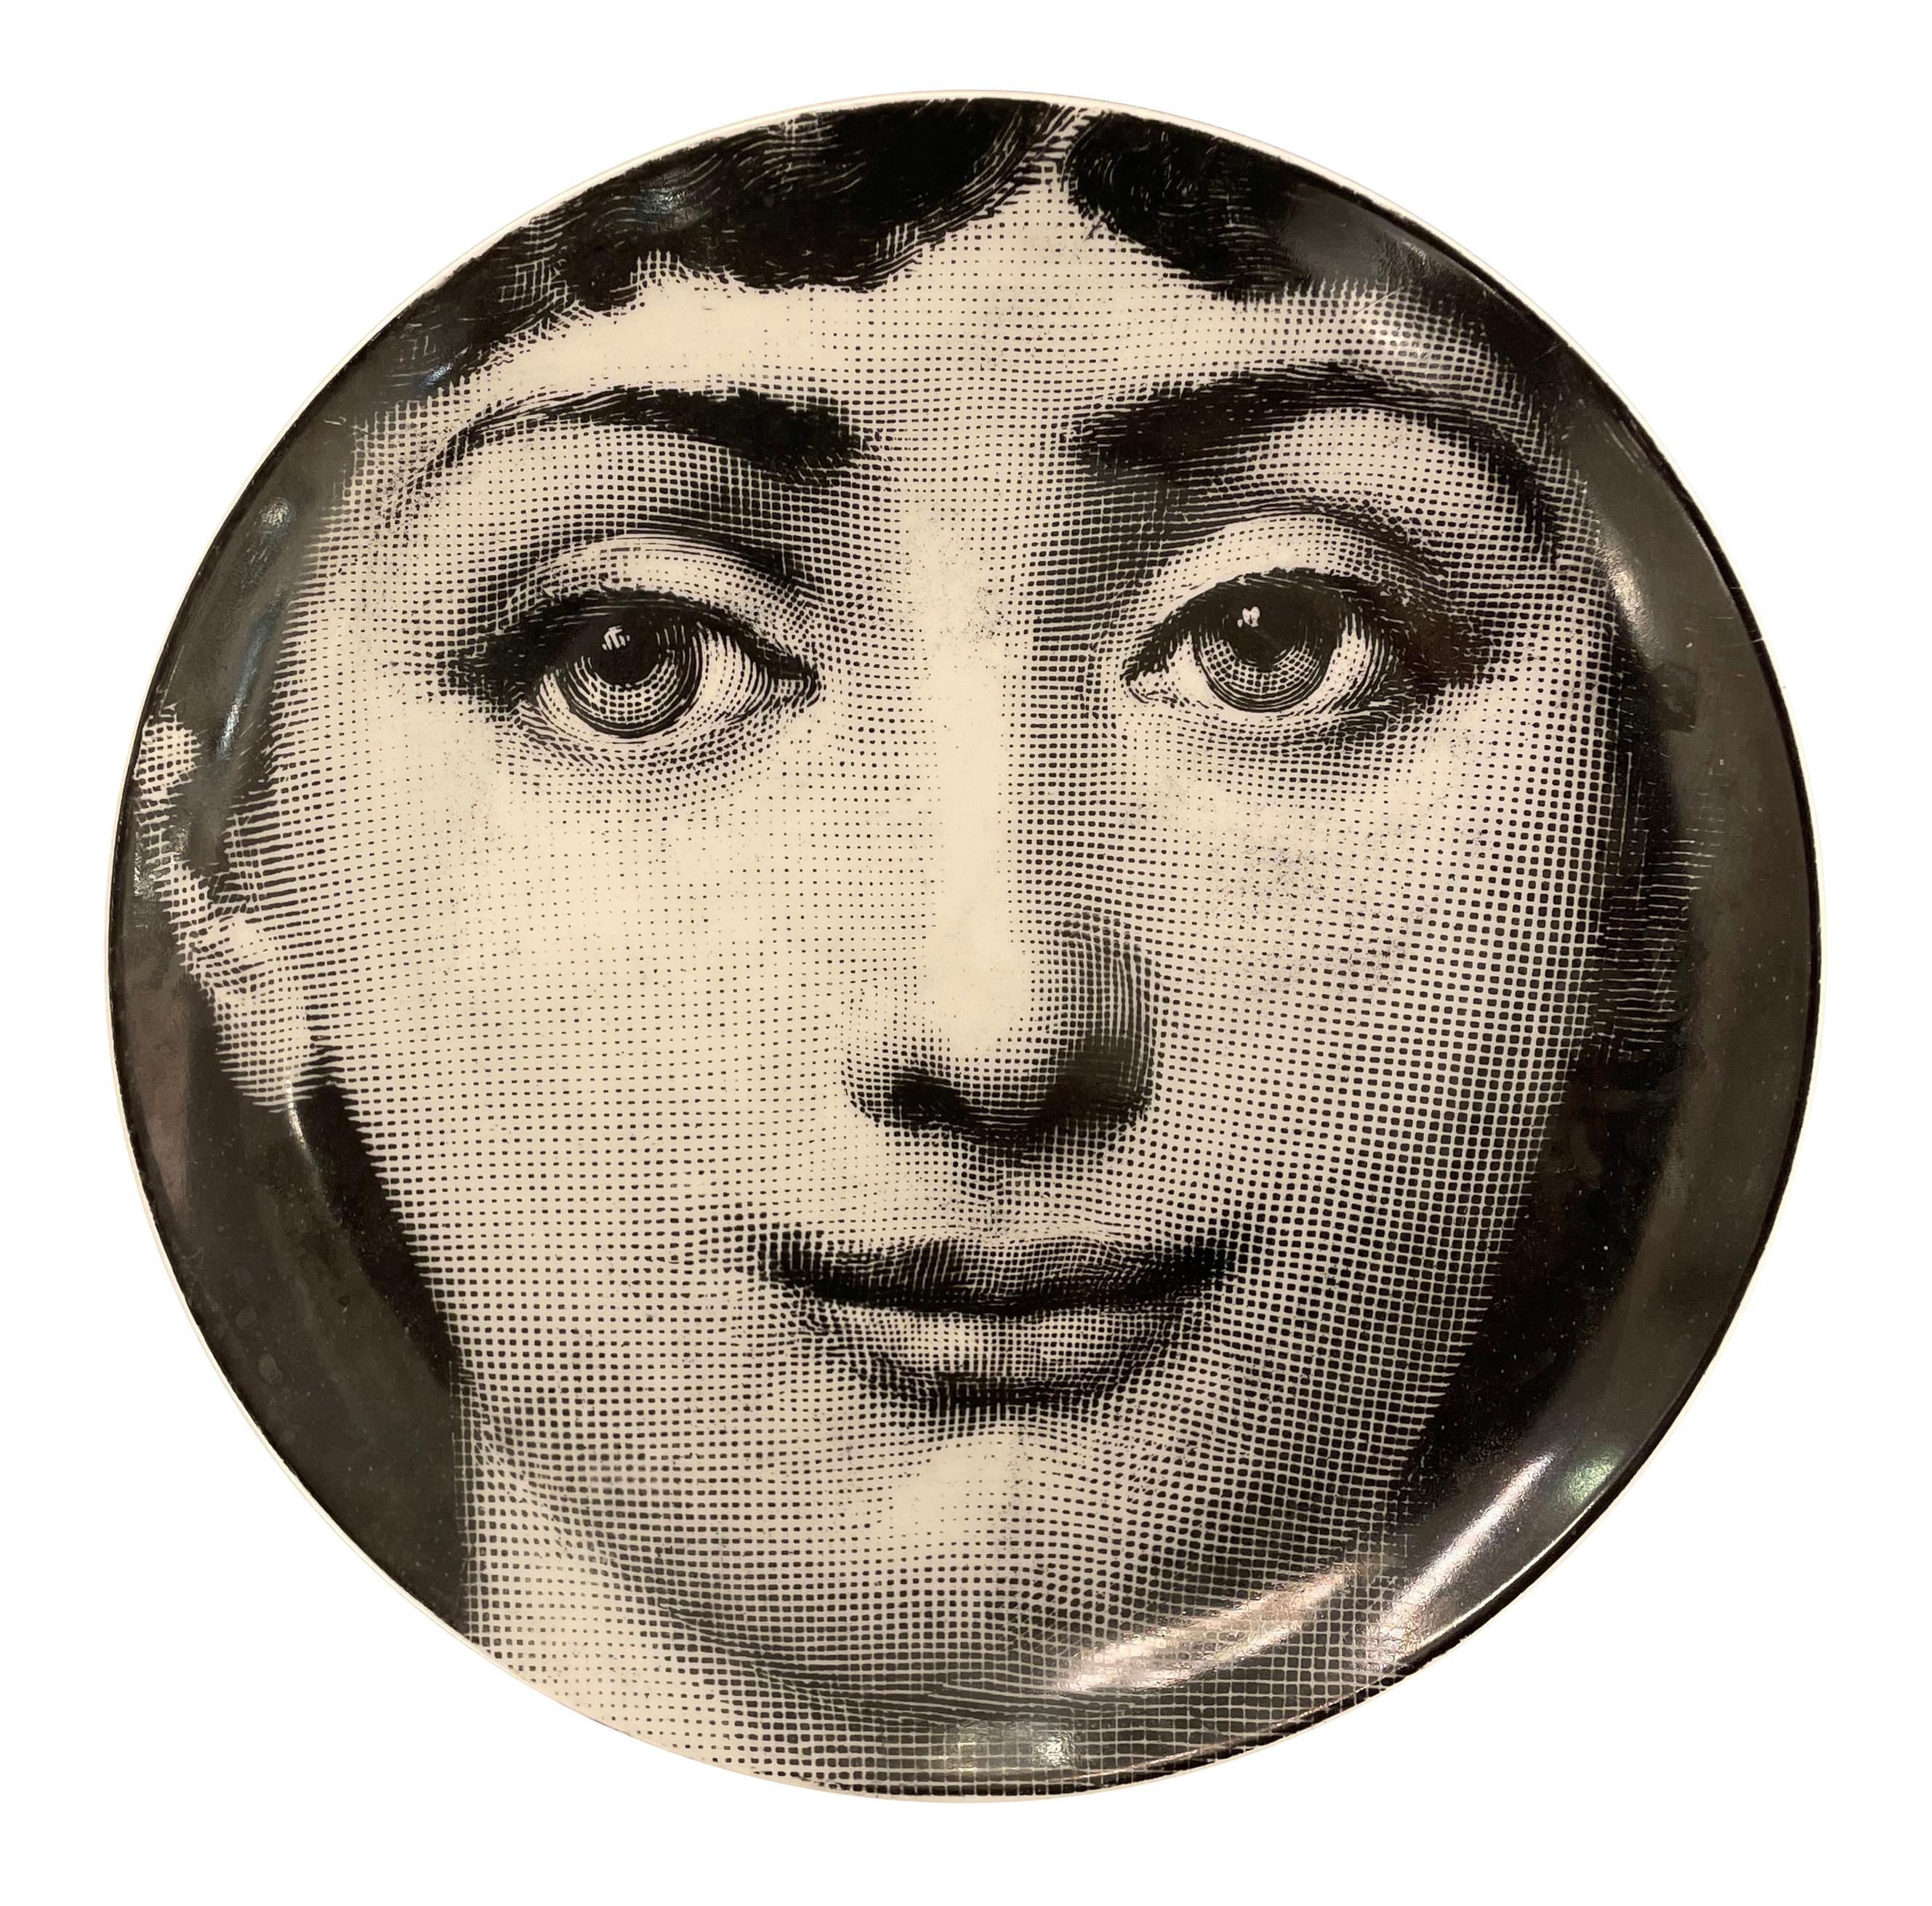 Ceramic Vintage Piero Fornasetti Plates from the 